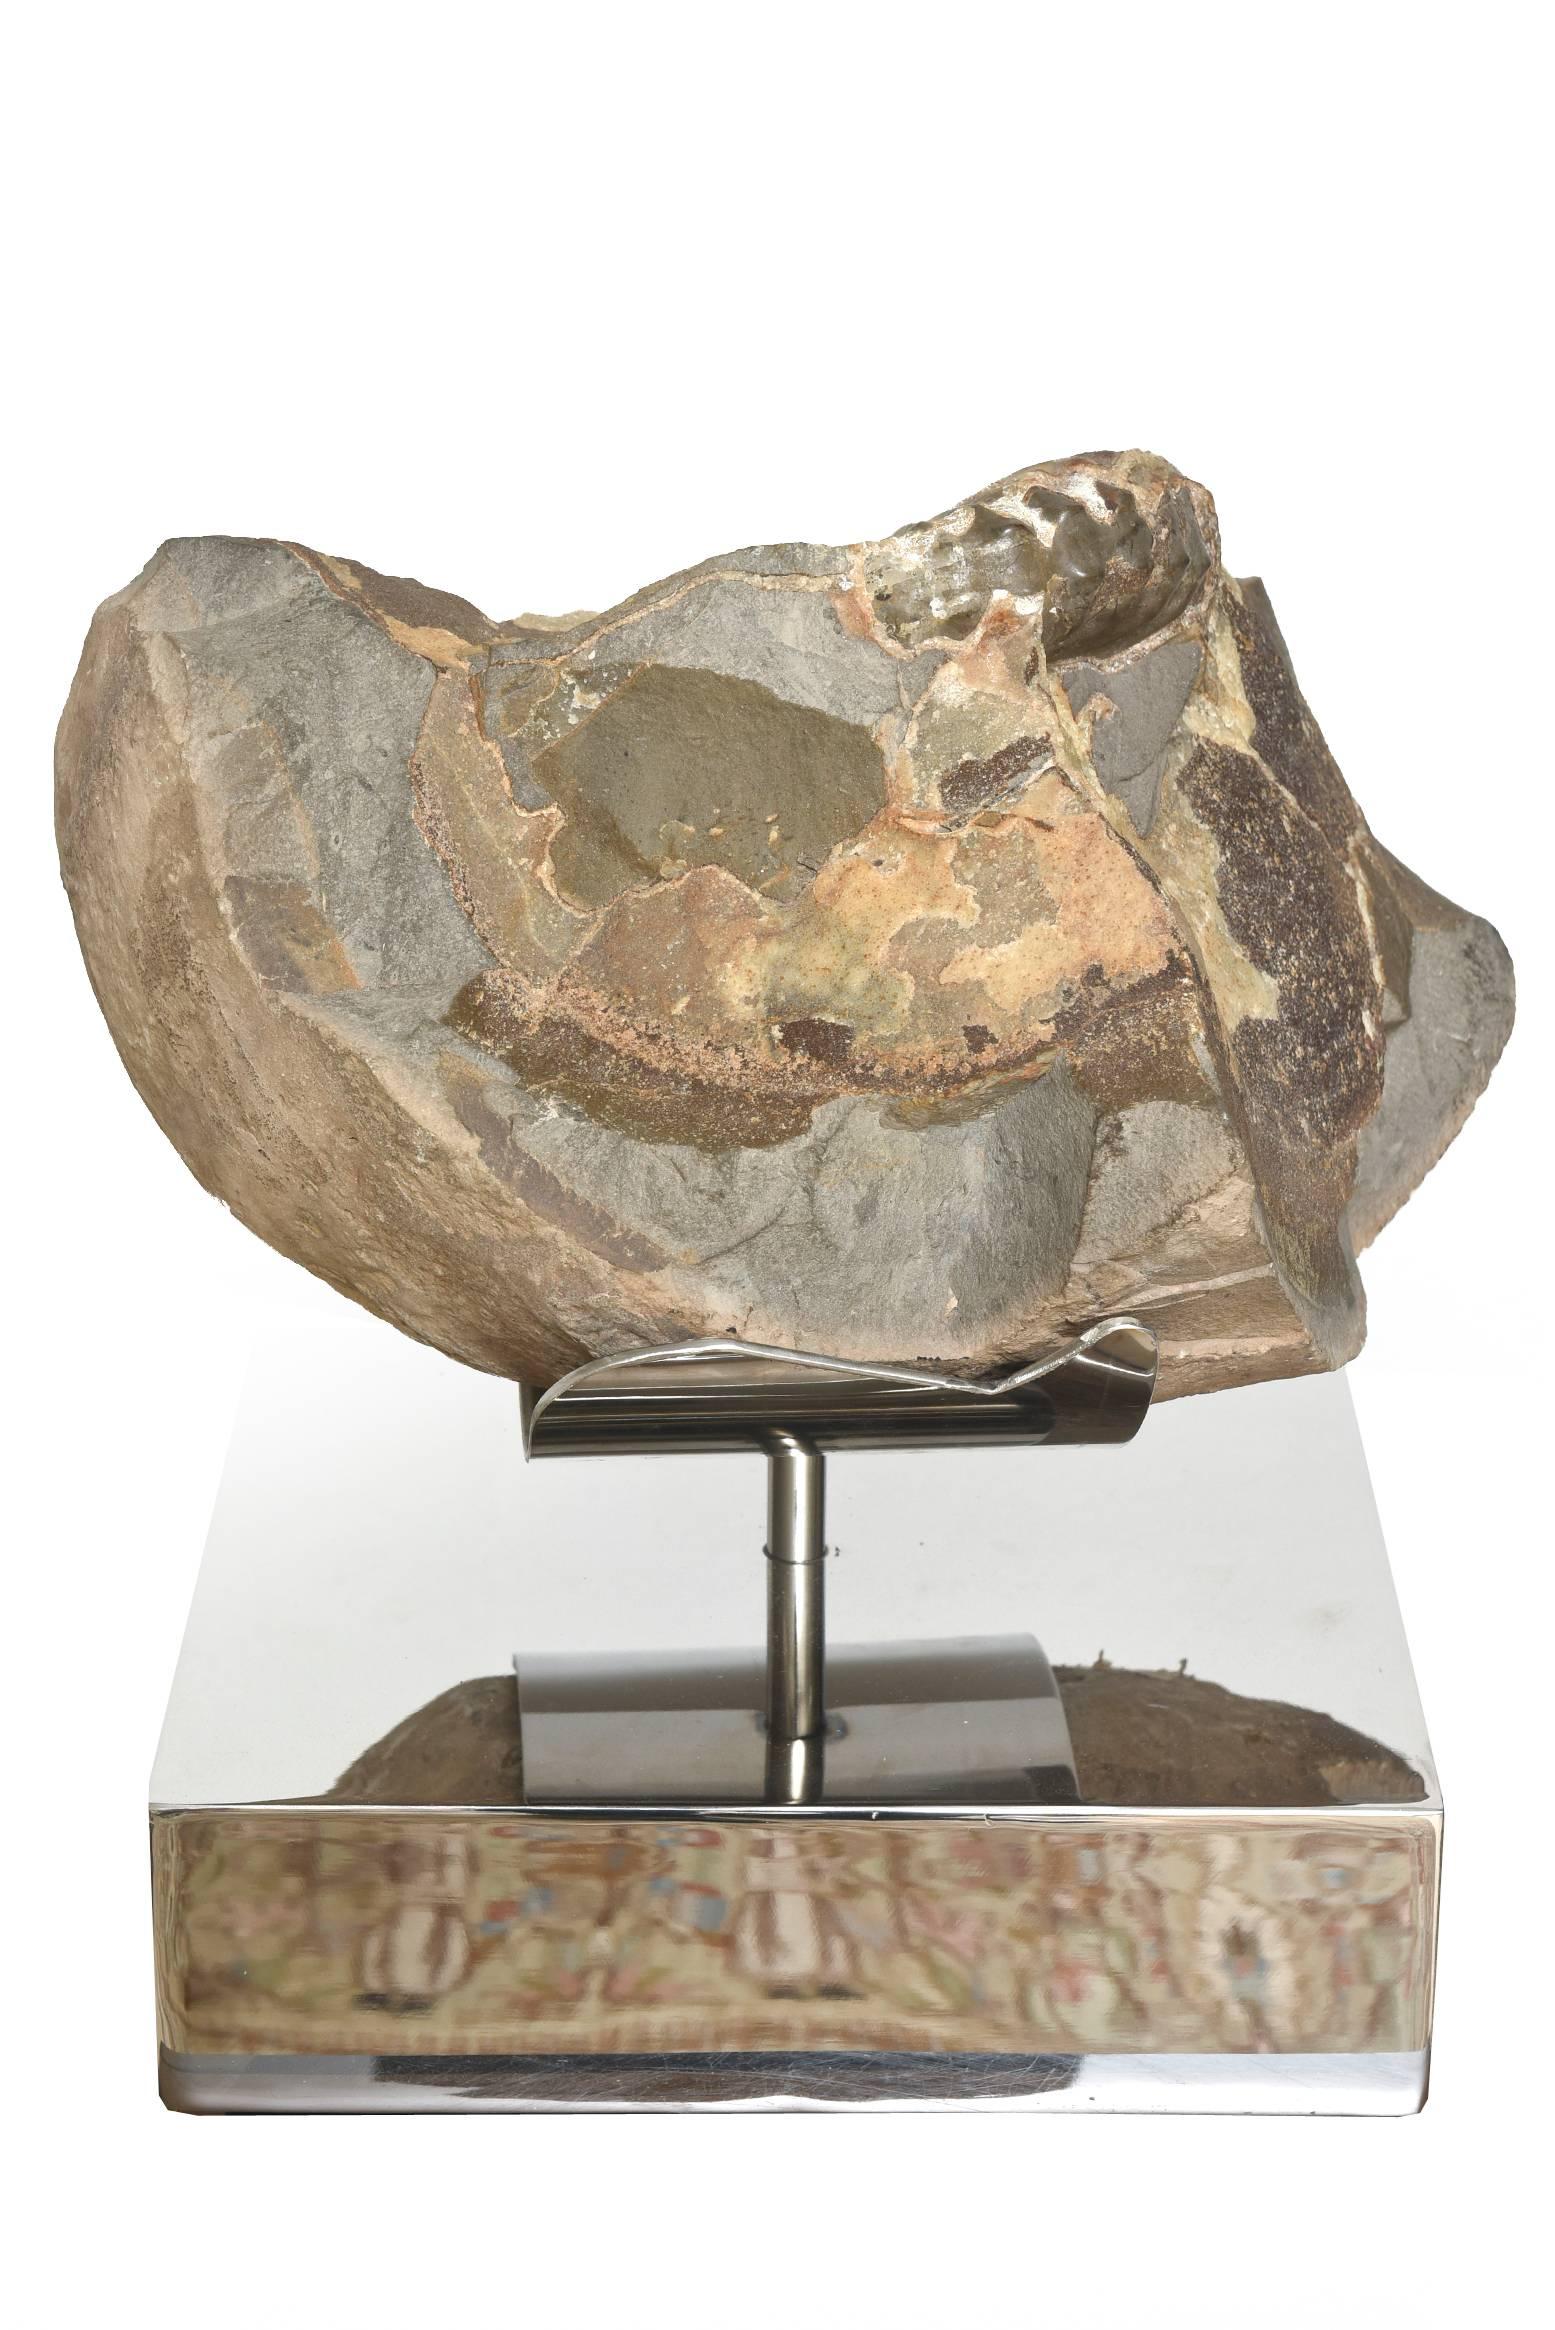 Organic Modern Petrified Wood/ Fossil and Stainless Steel Mounted Sculpture For Sale 1